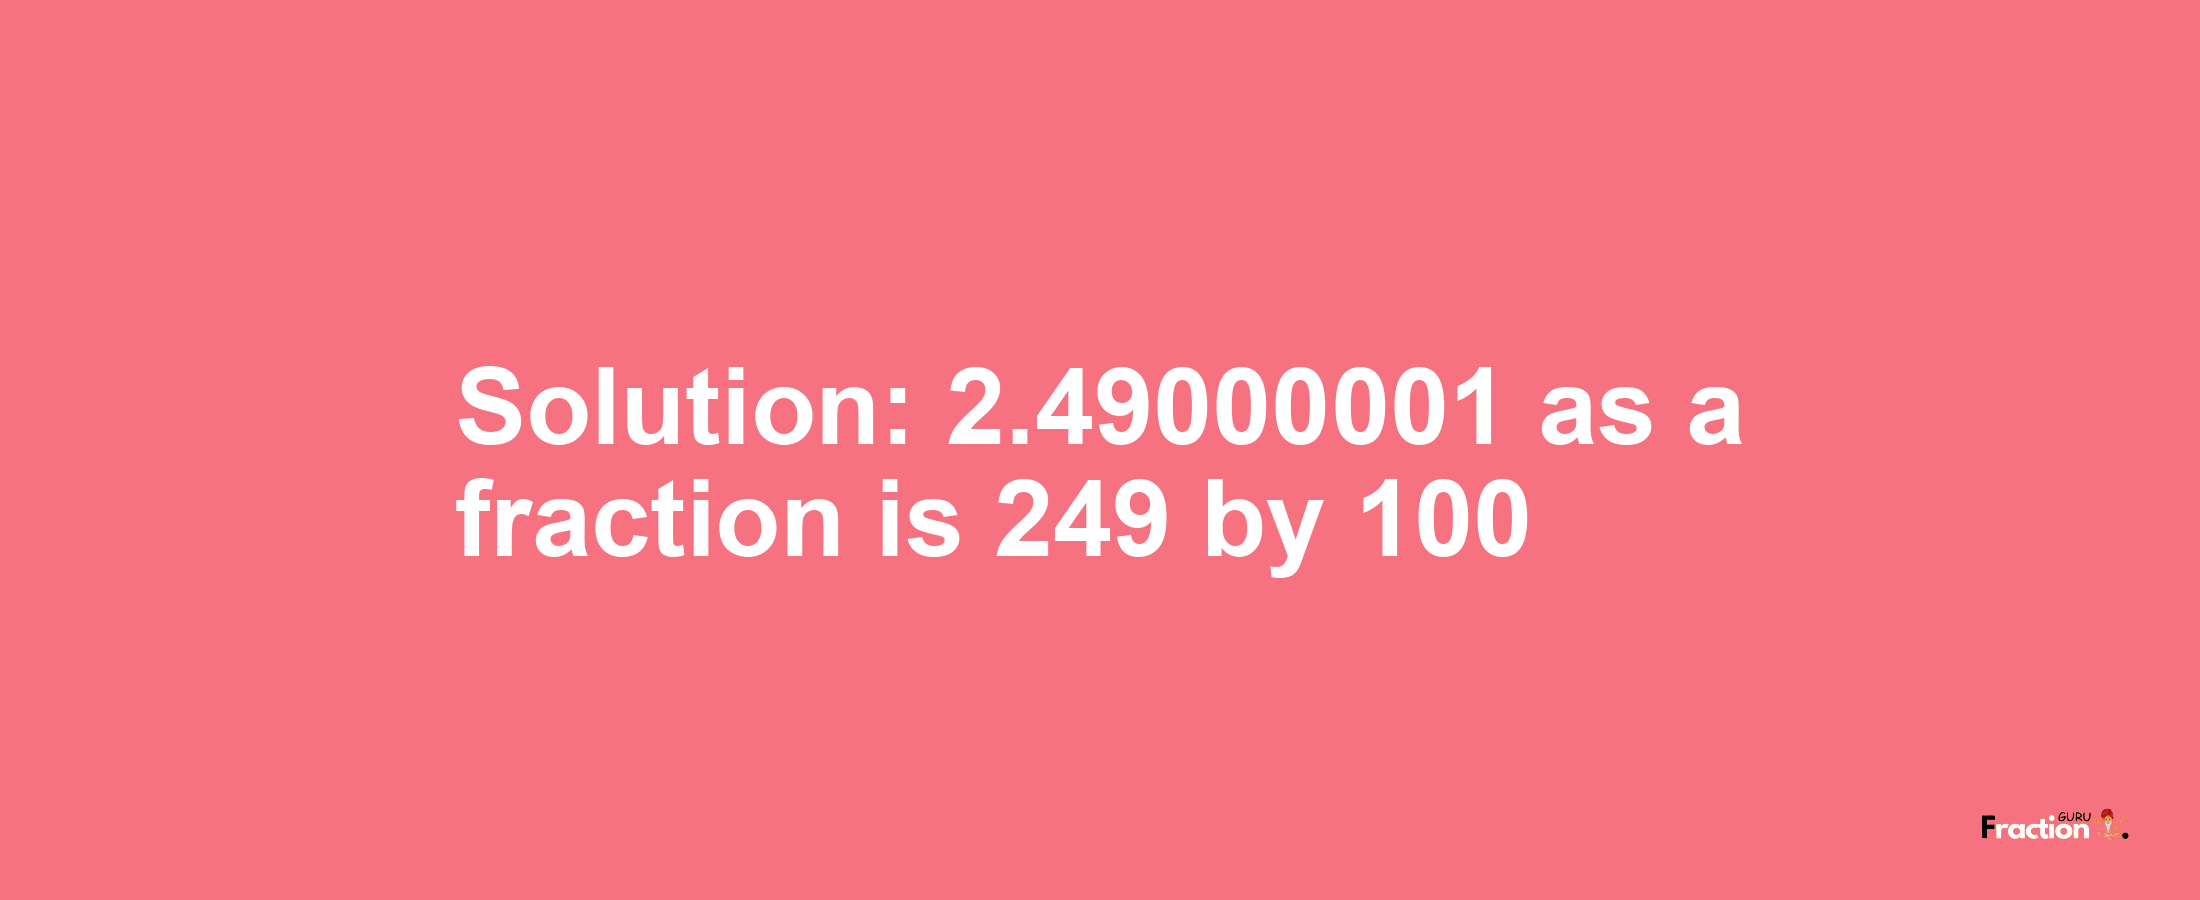 Solution:2.49000001 as a fraction is 249/100